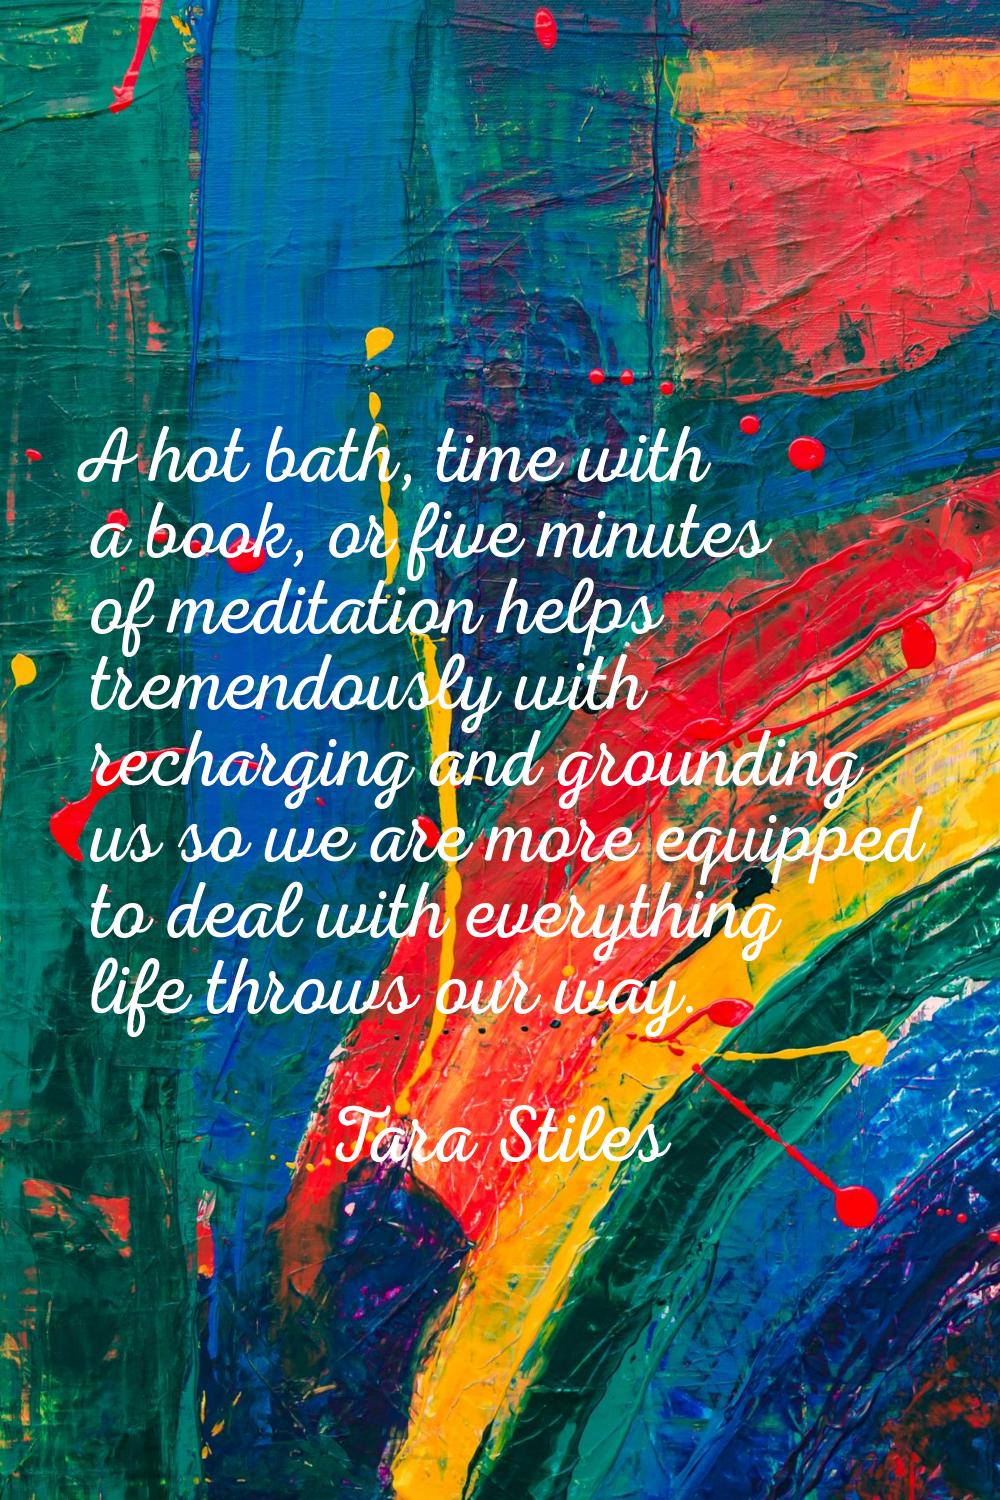 A hot bath, time with a book, or five minutes of meditation helps tremendously with recharging and 